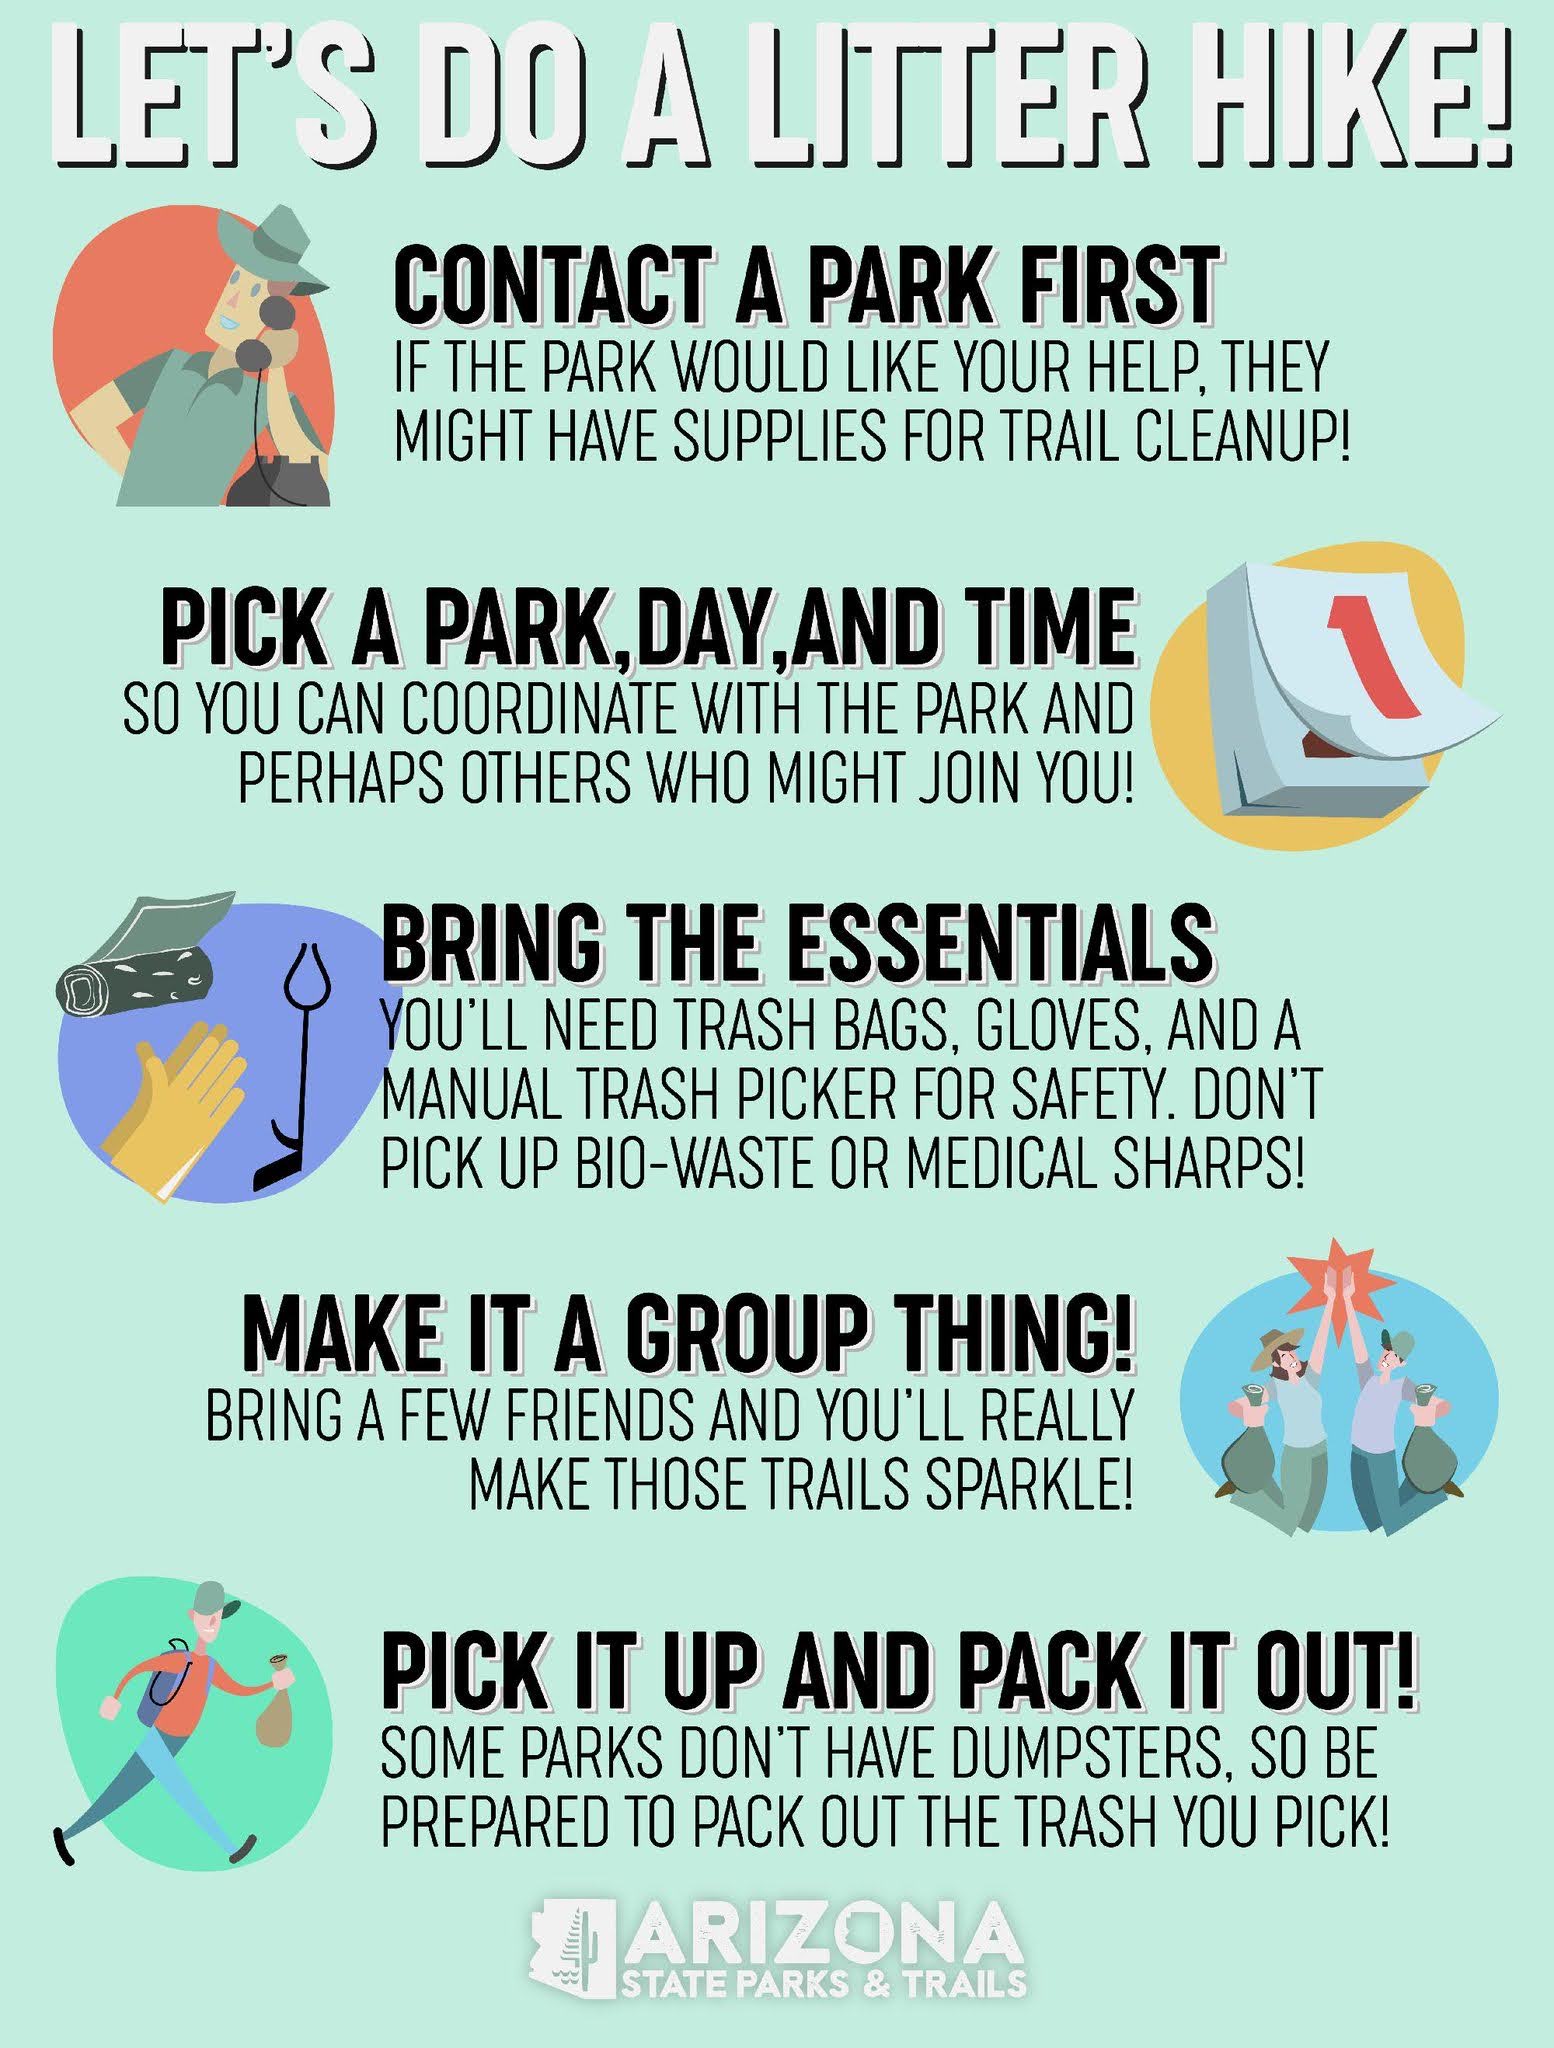 An infographic that says Let's Do a Litter Hike: Contact a park first, pick a park, day, and time; bring the essentials like trash bags, gloves, and a manual trash picker; make it a group thing by bringing a few friends, and pick it up and pack it out...some parks don't have dumpsters so be prepared to pack out the trash you pick.